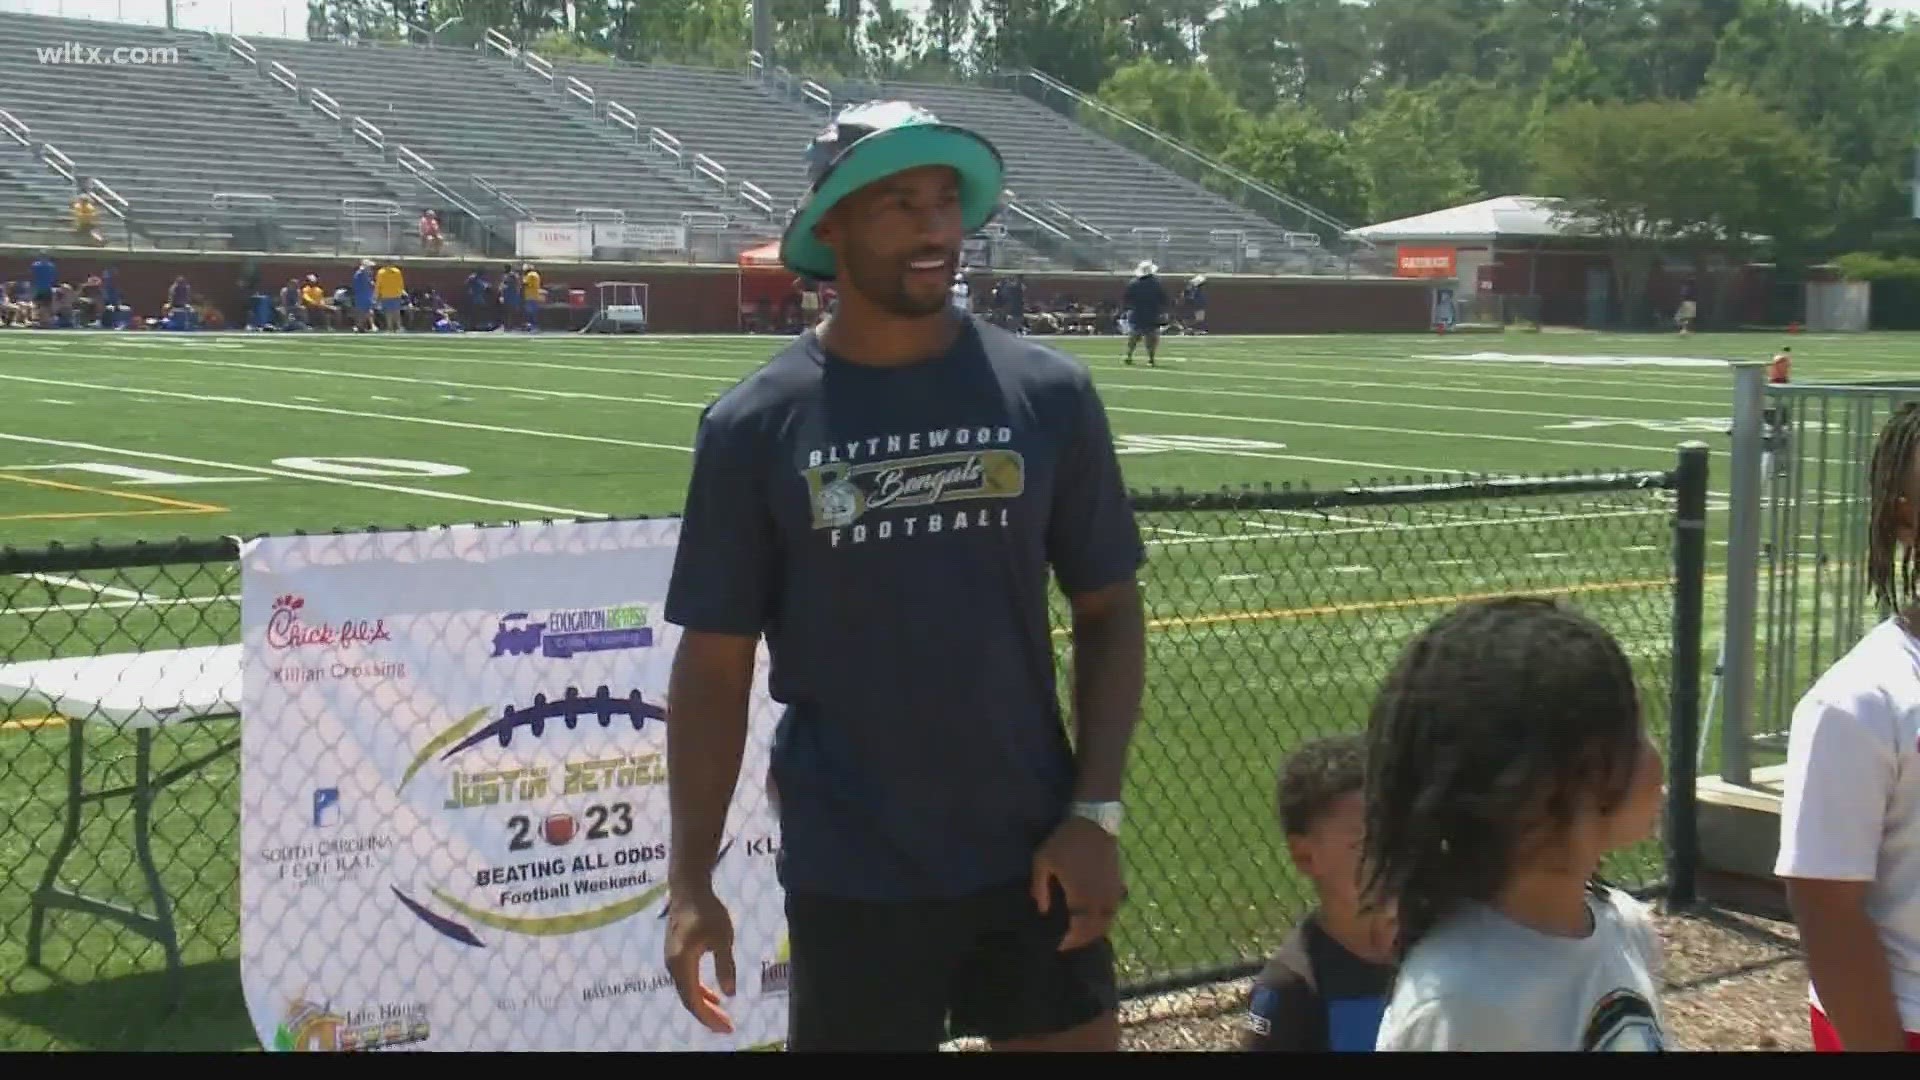 Current Miami Dolphins defensive back and Blythewood grad Justin Bethel was back at home over the weekend to host his football camp and 7 on 7 tournament.